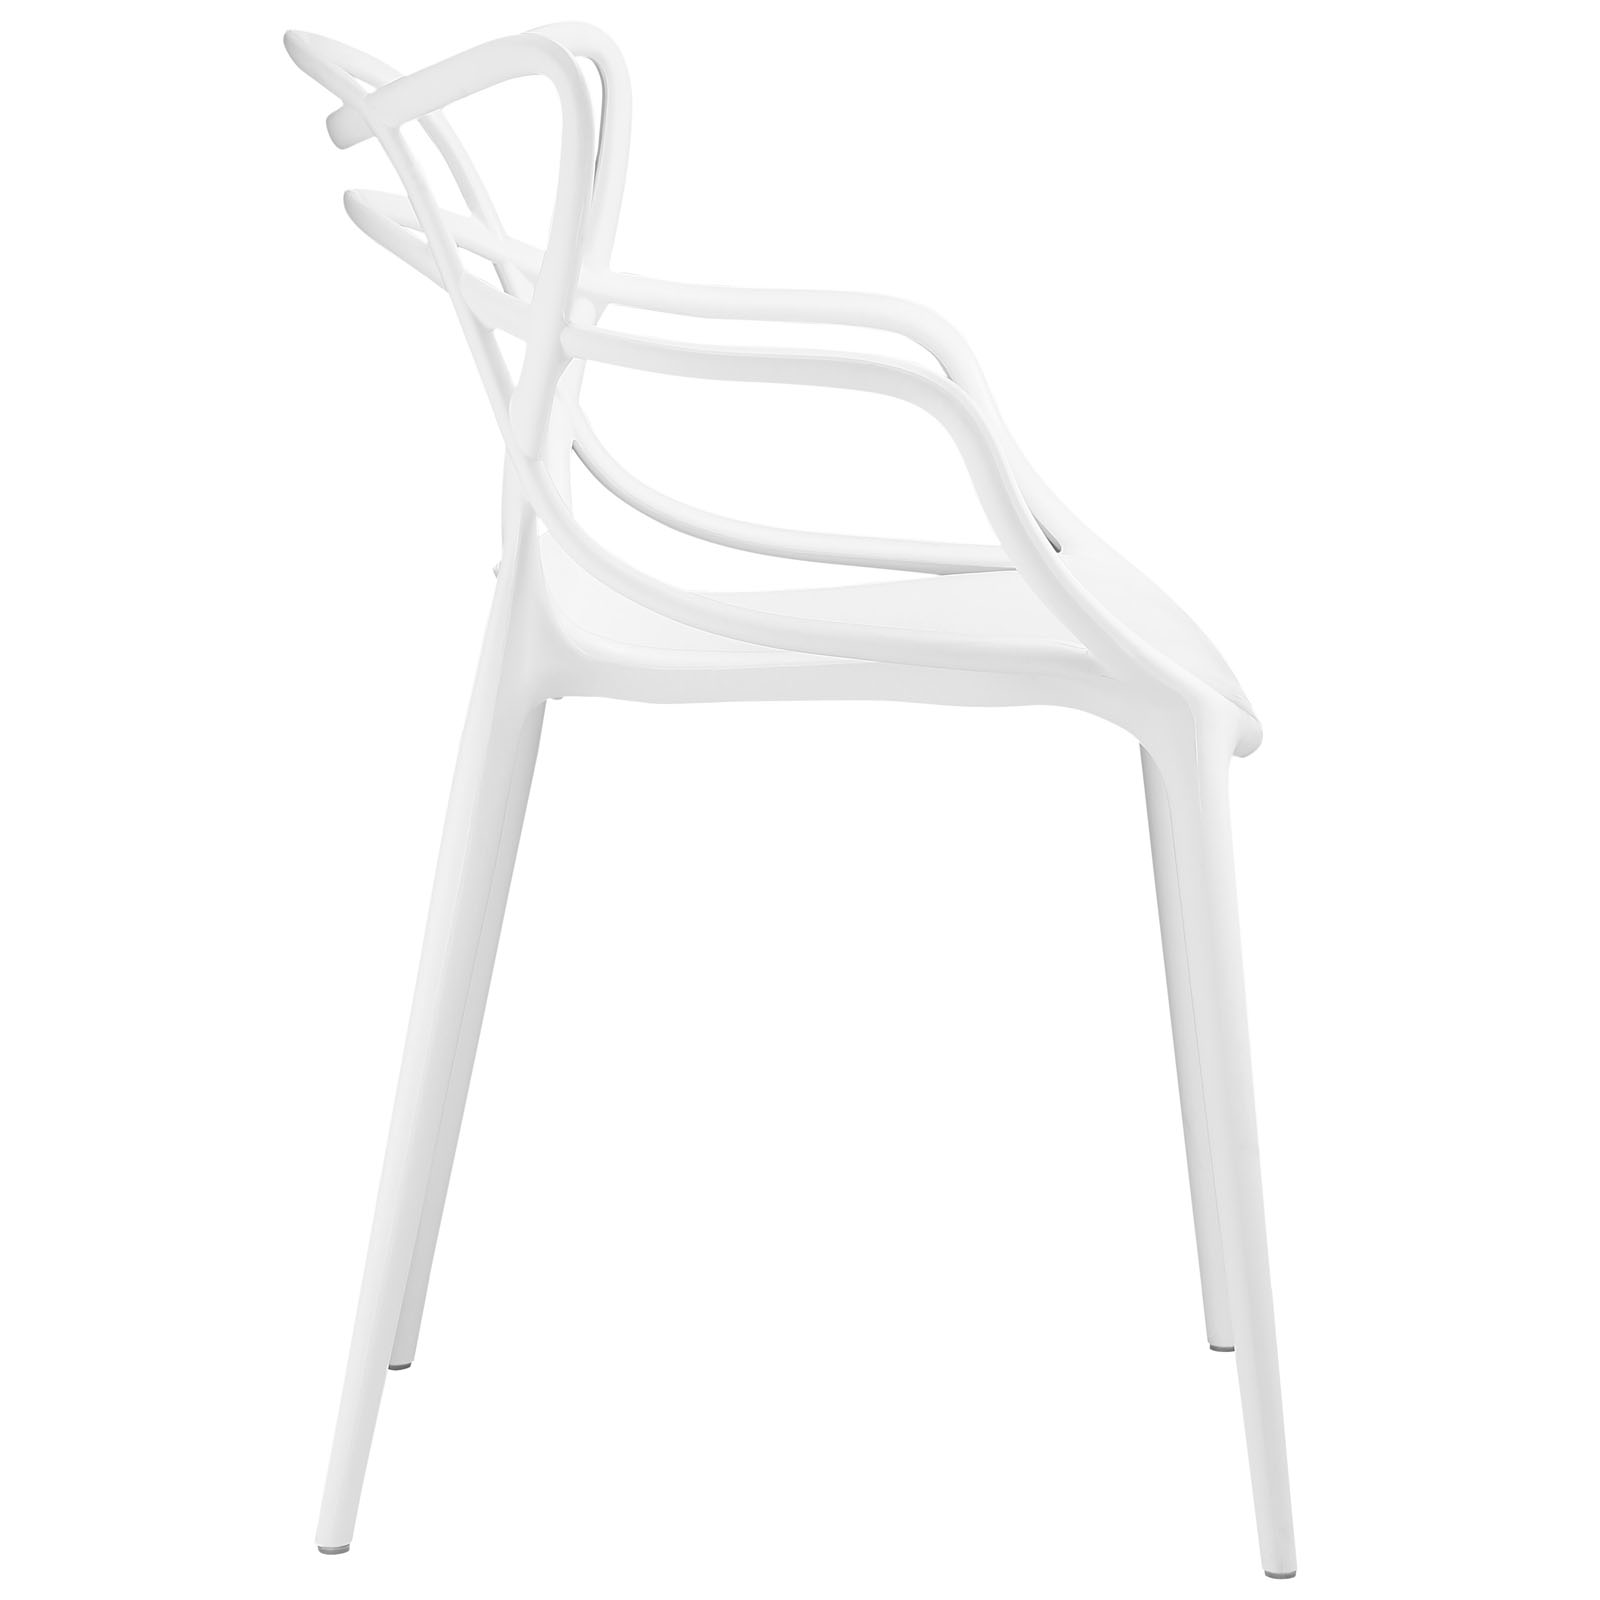 Modern Contemporary Urban Design Outdoor Kitchen Room Dining Chair Set ( Set of 4), White, Plastic - image 3 of 4